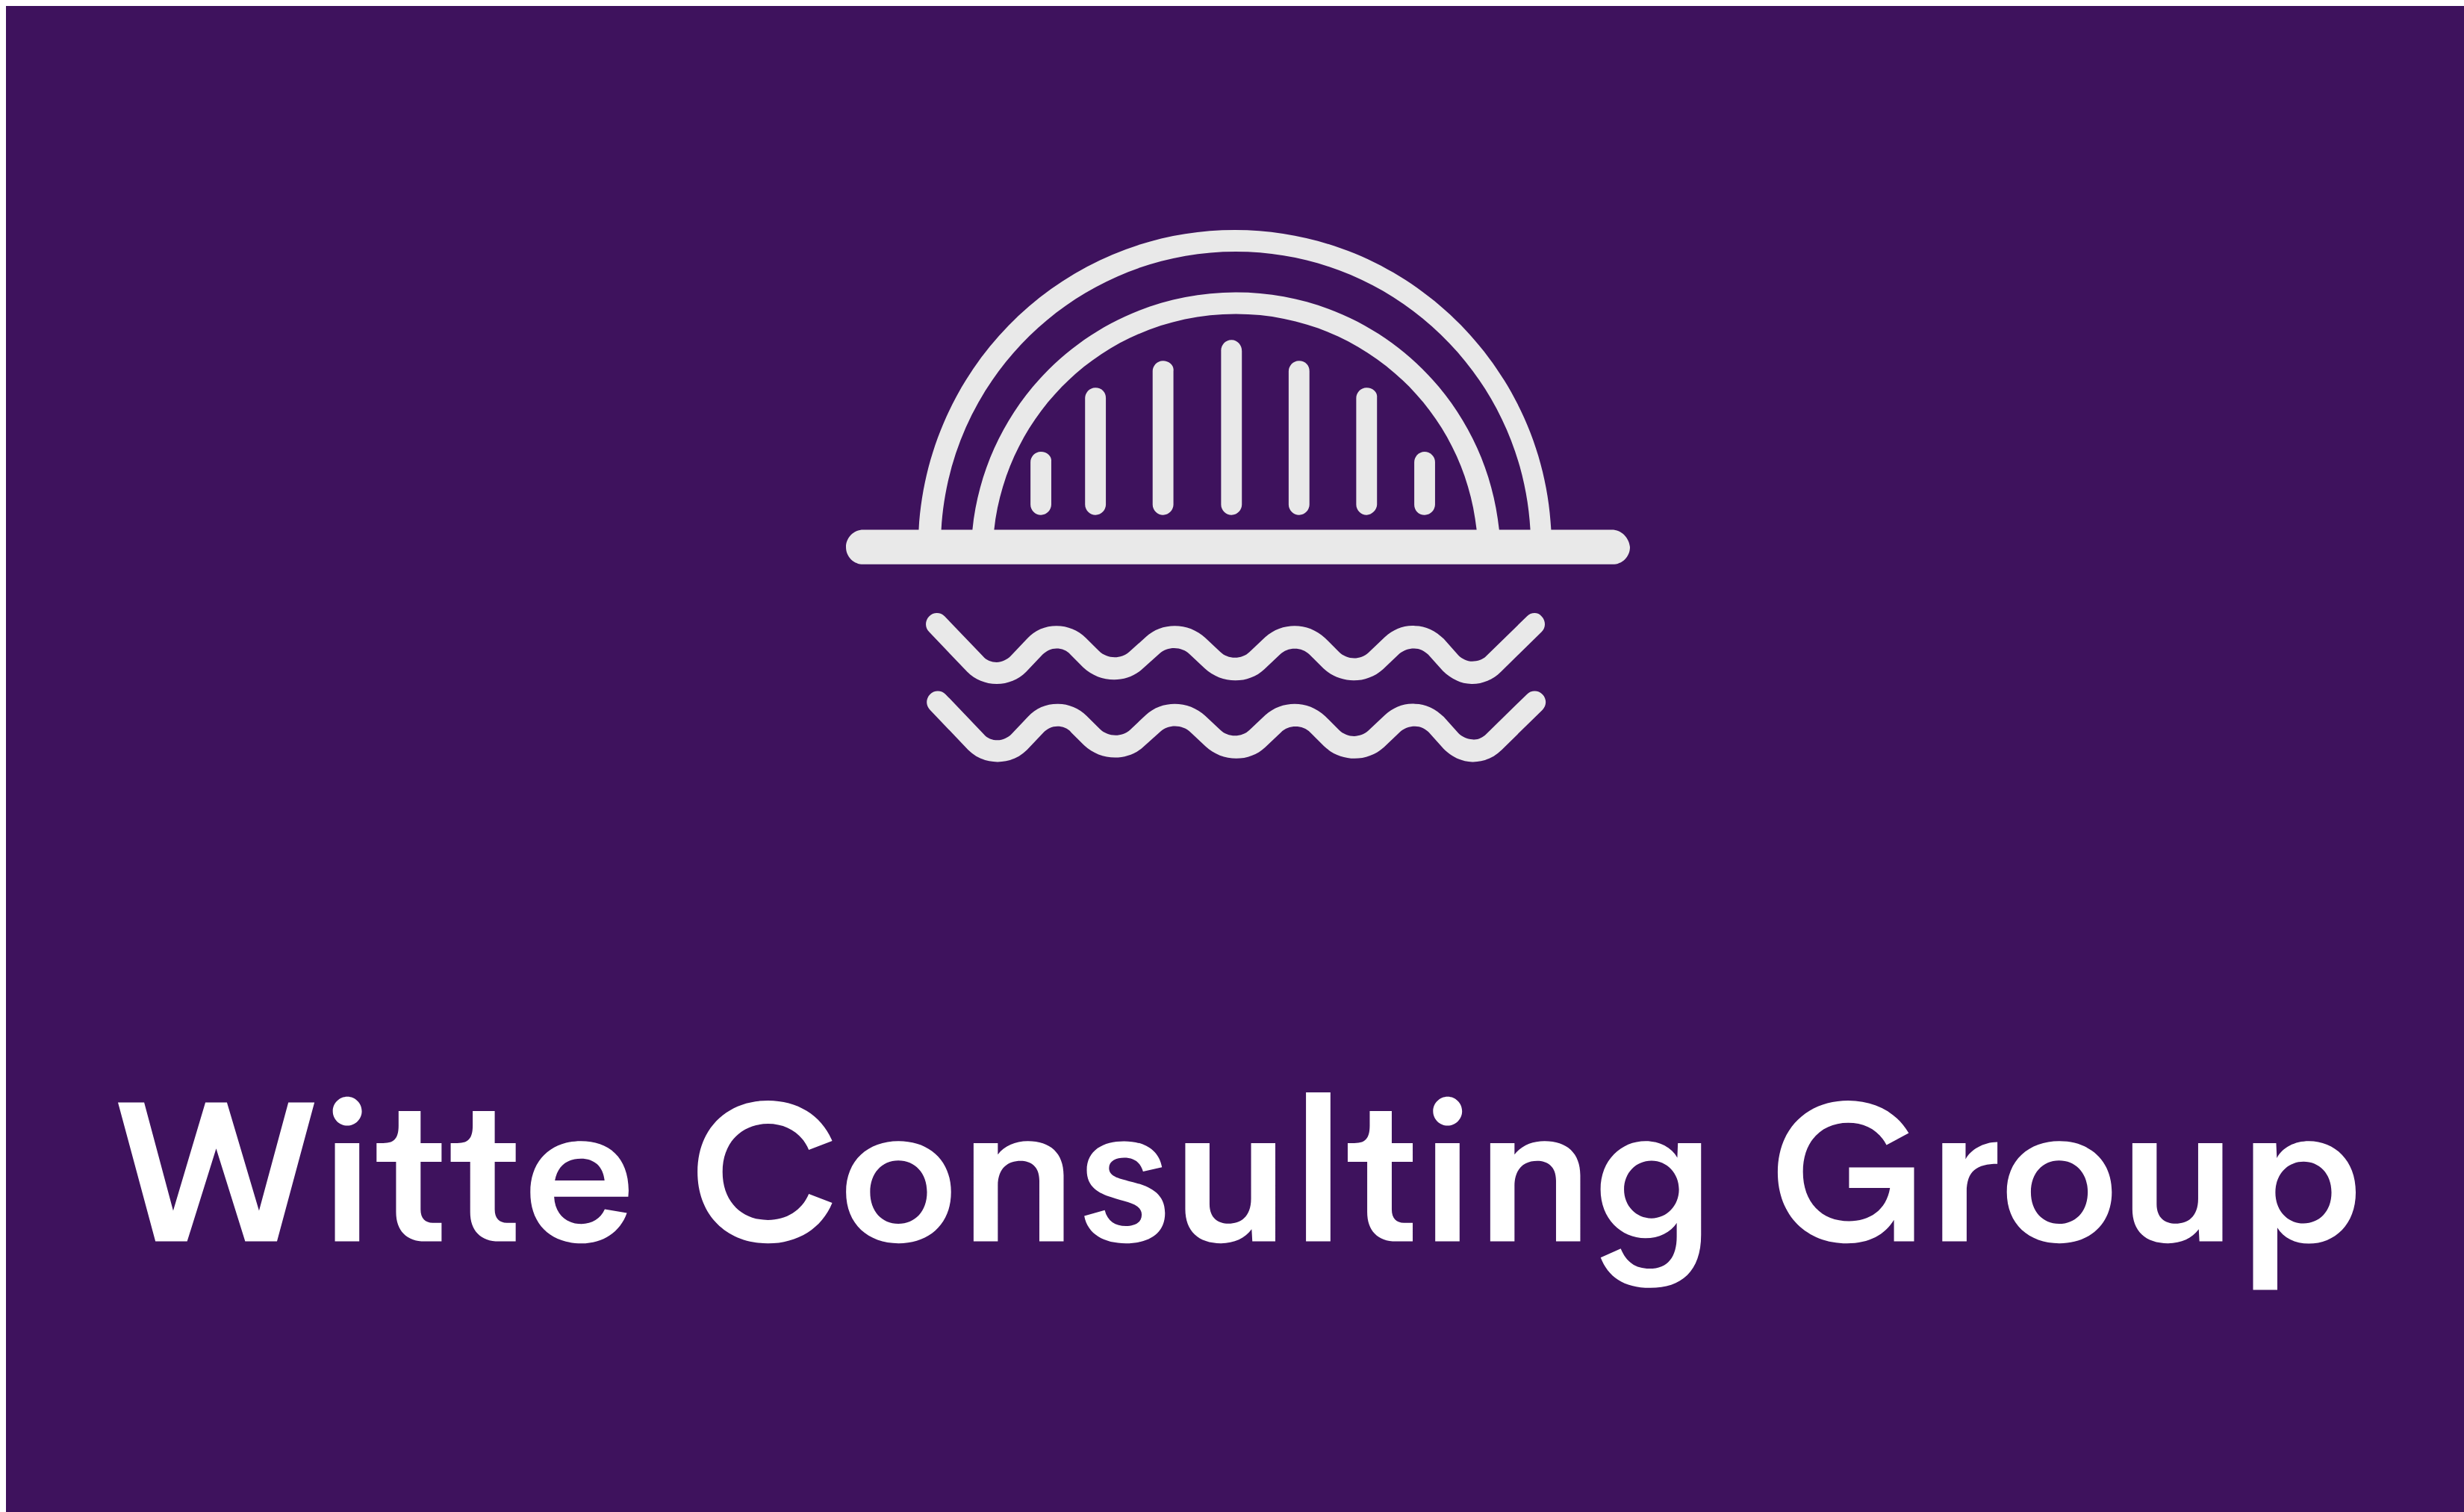 Witte Consulting Group logo is a bridge symboling connections